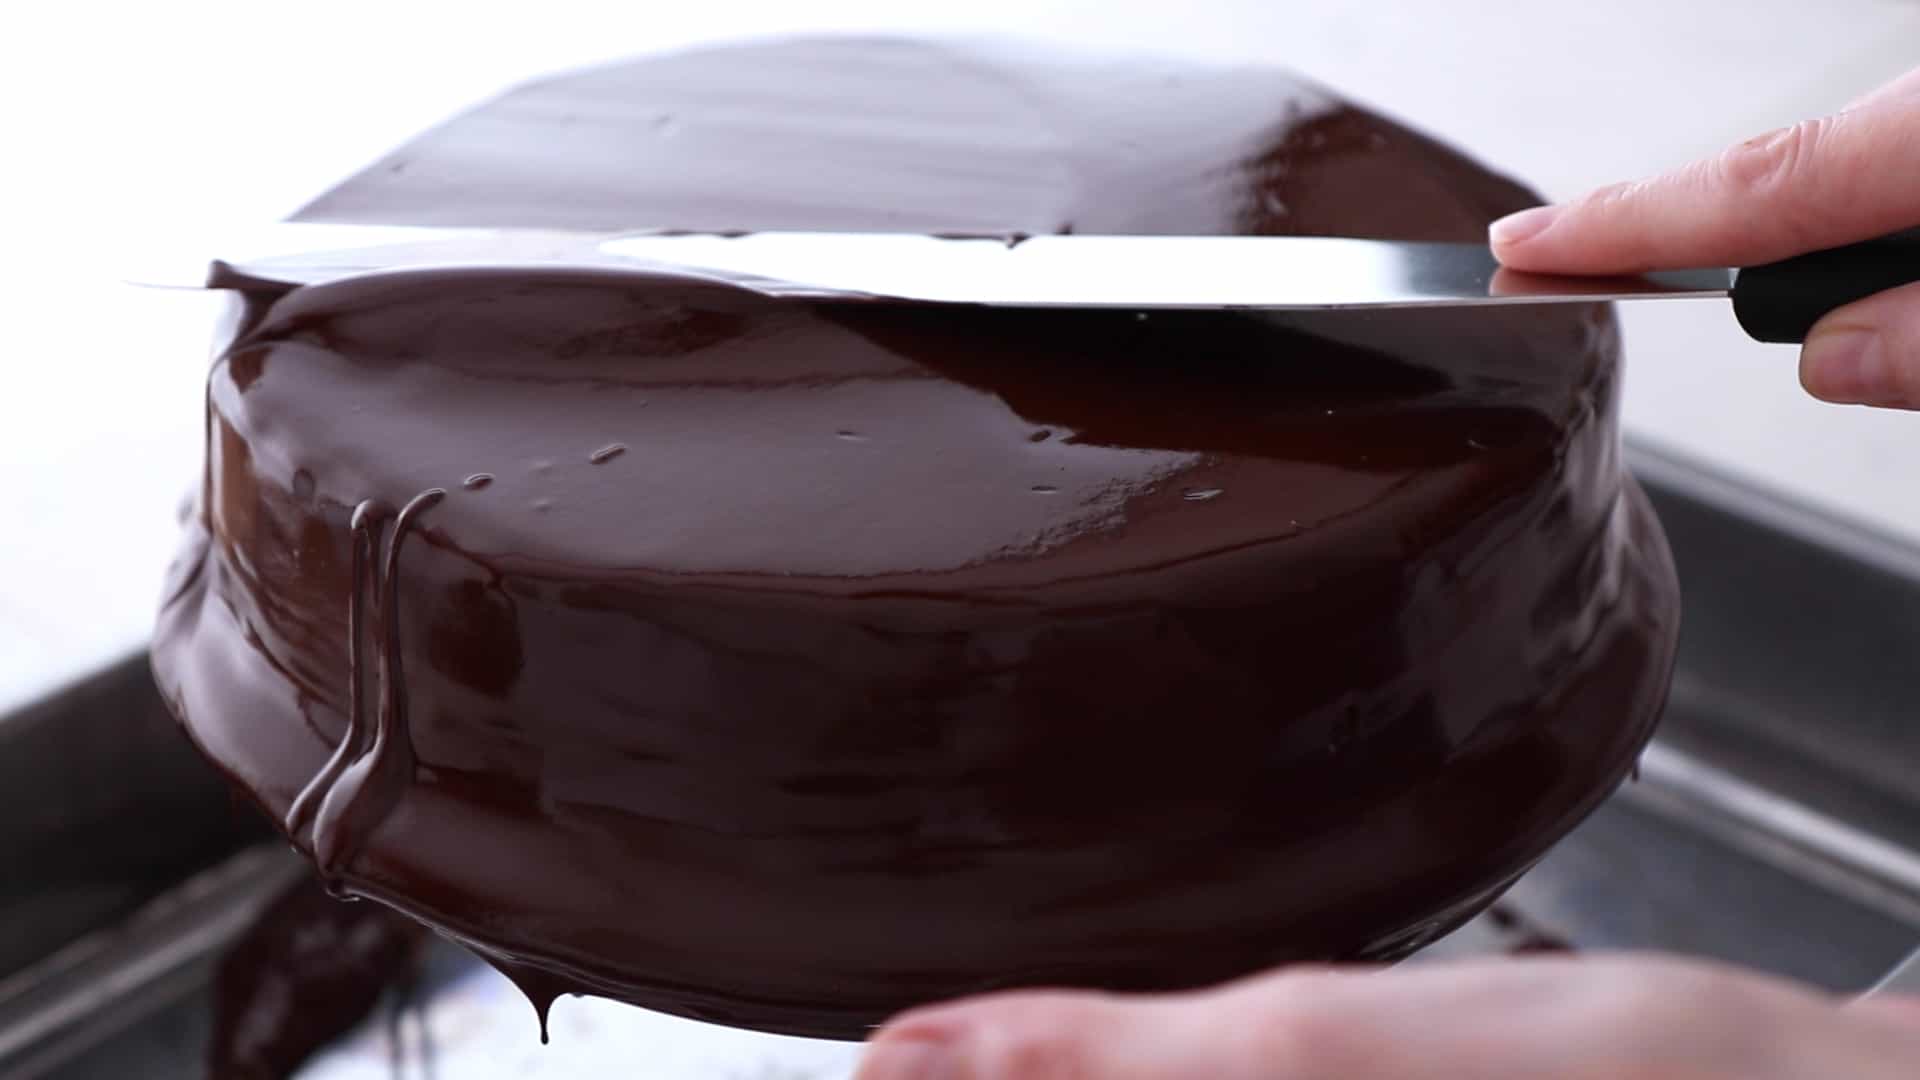 Spreading chocolate glaze over the cake with a long spatula